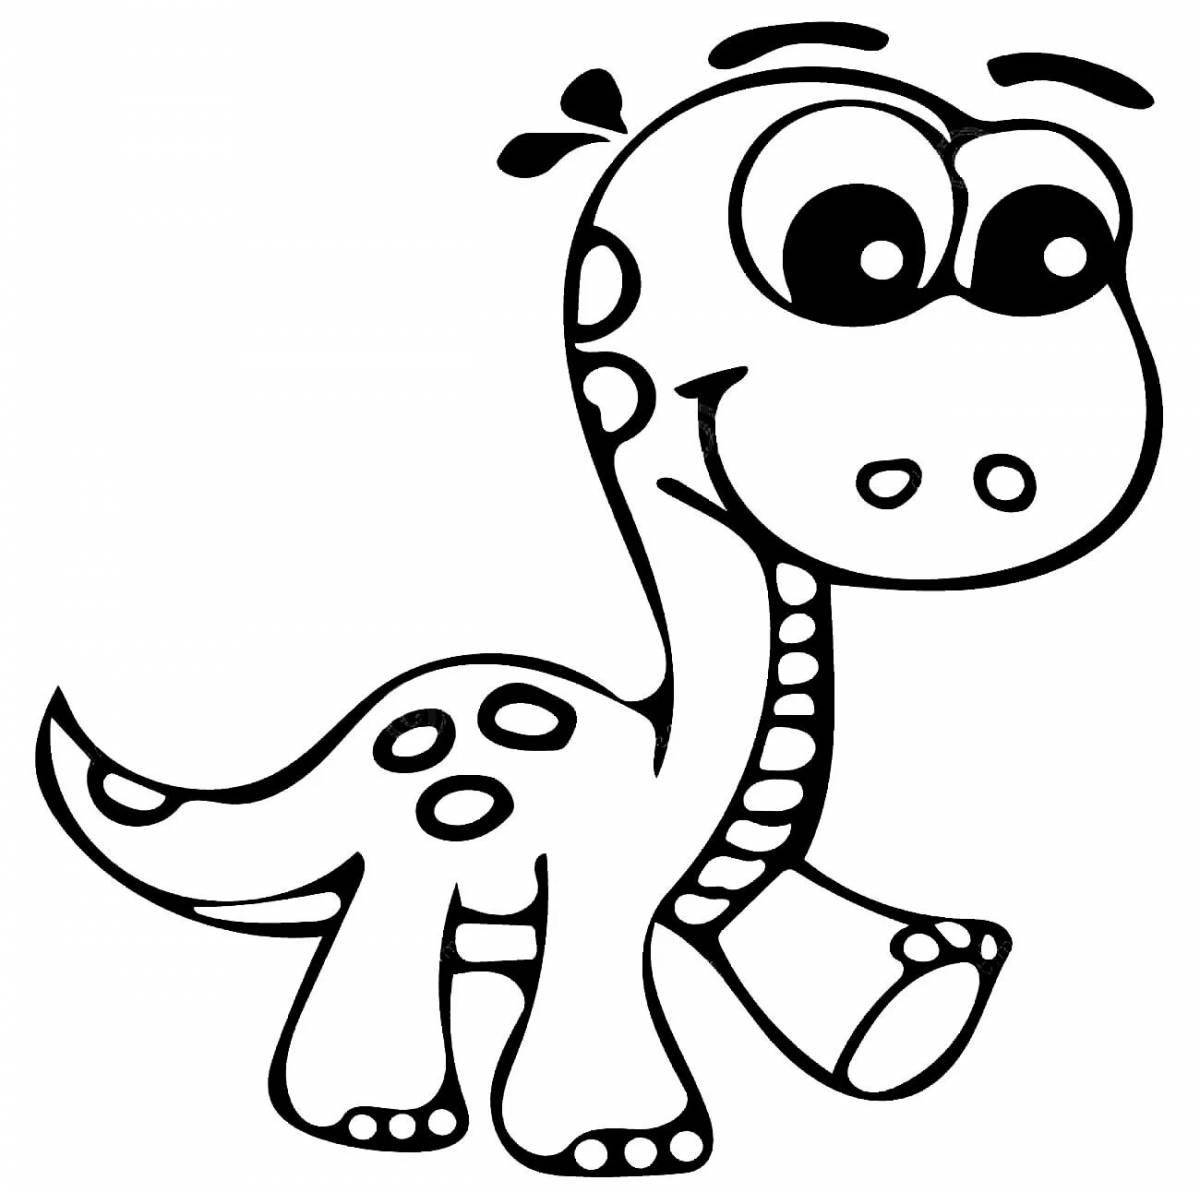 Sparkling cute dinosaur coloring page